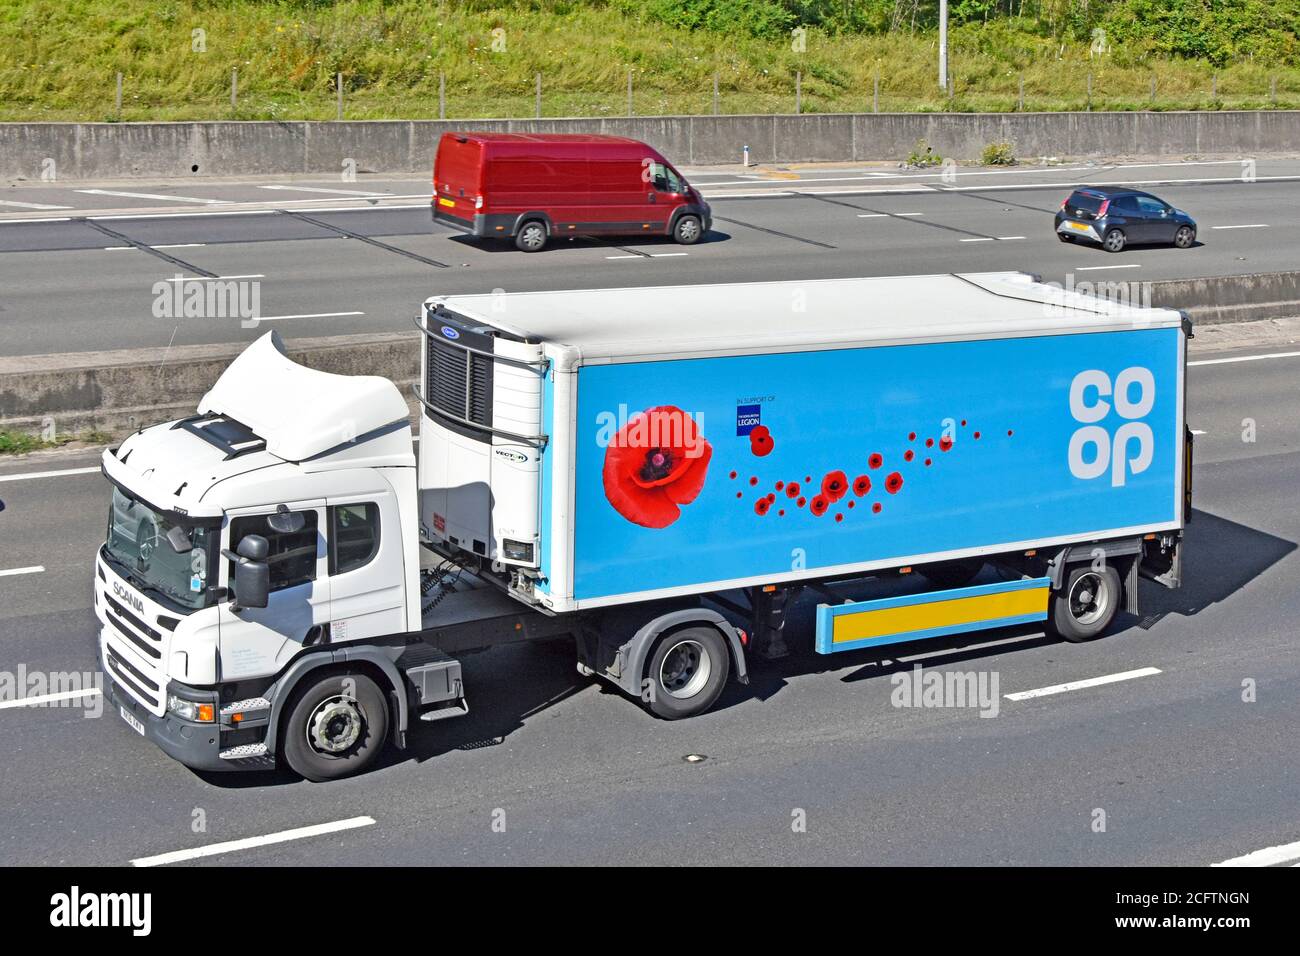 Coop co op food supply chain Scania store delivery lorry truck & short trailer red poppy graphic supporting Royal British Legion charity UK motorway Stock Photo